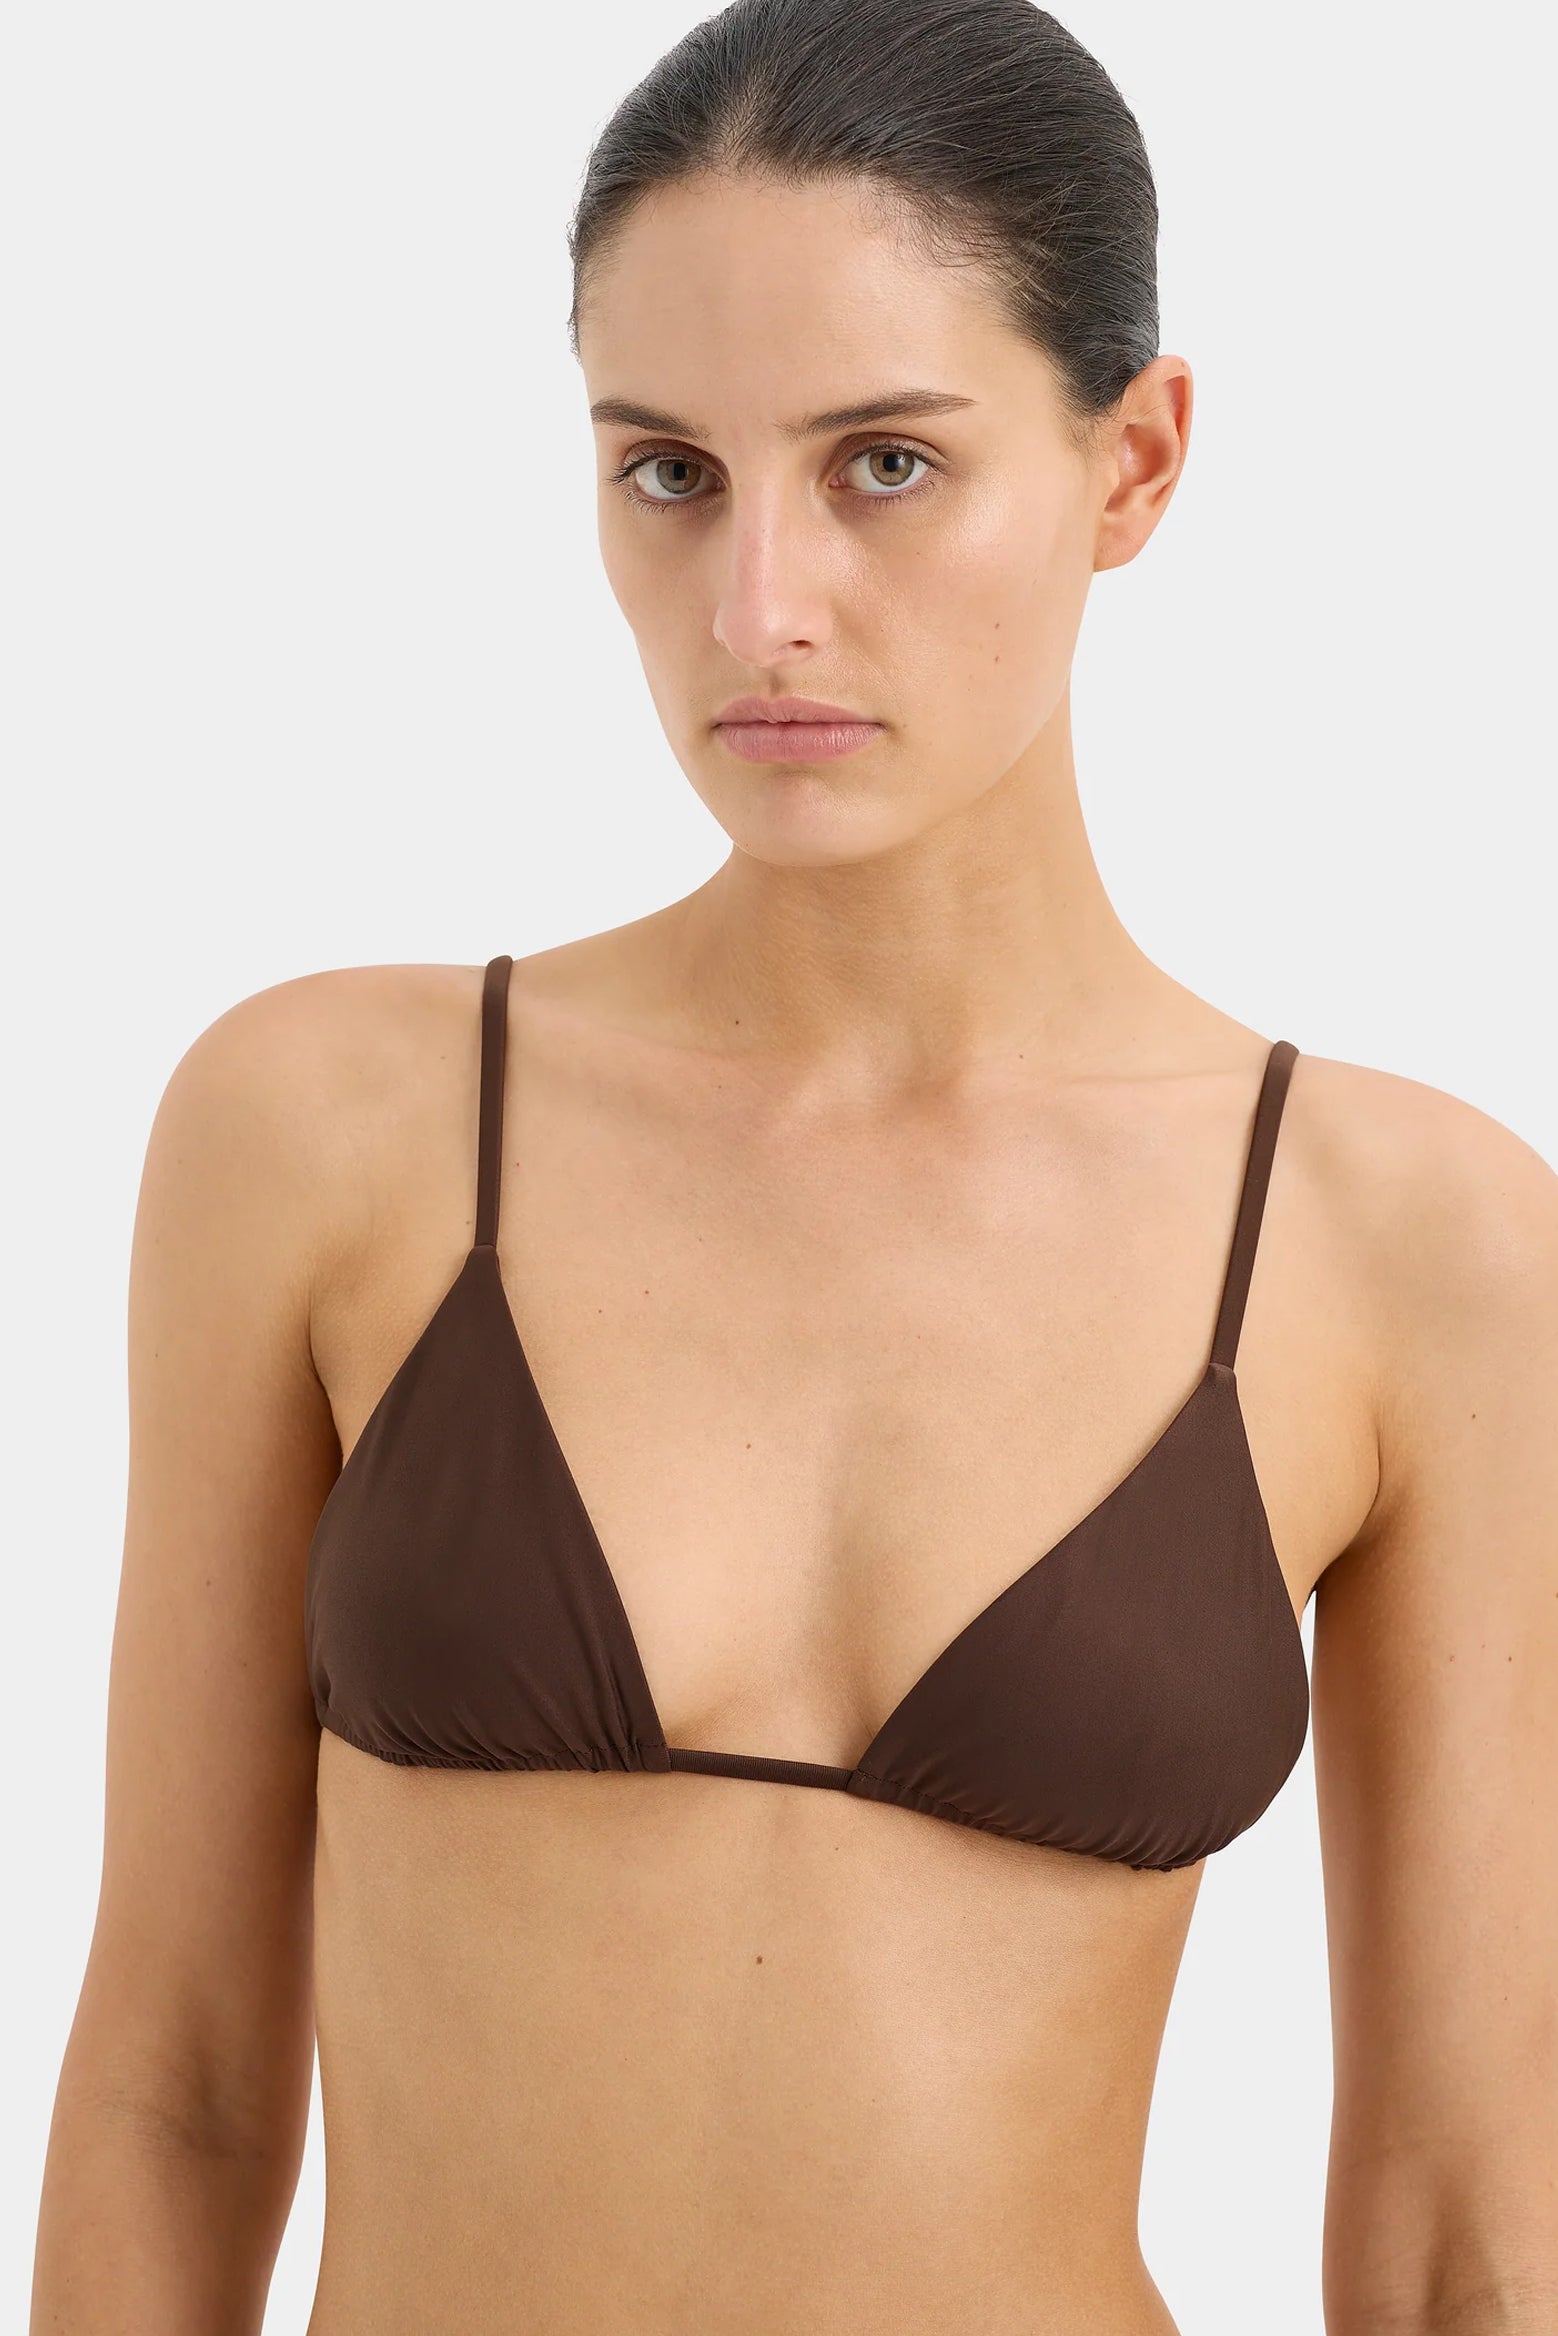 SIR Jeanne String Triangle Top in Chocolate | The New Trend 